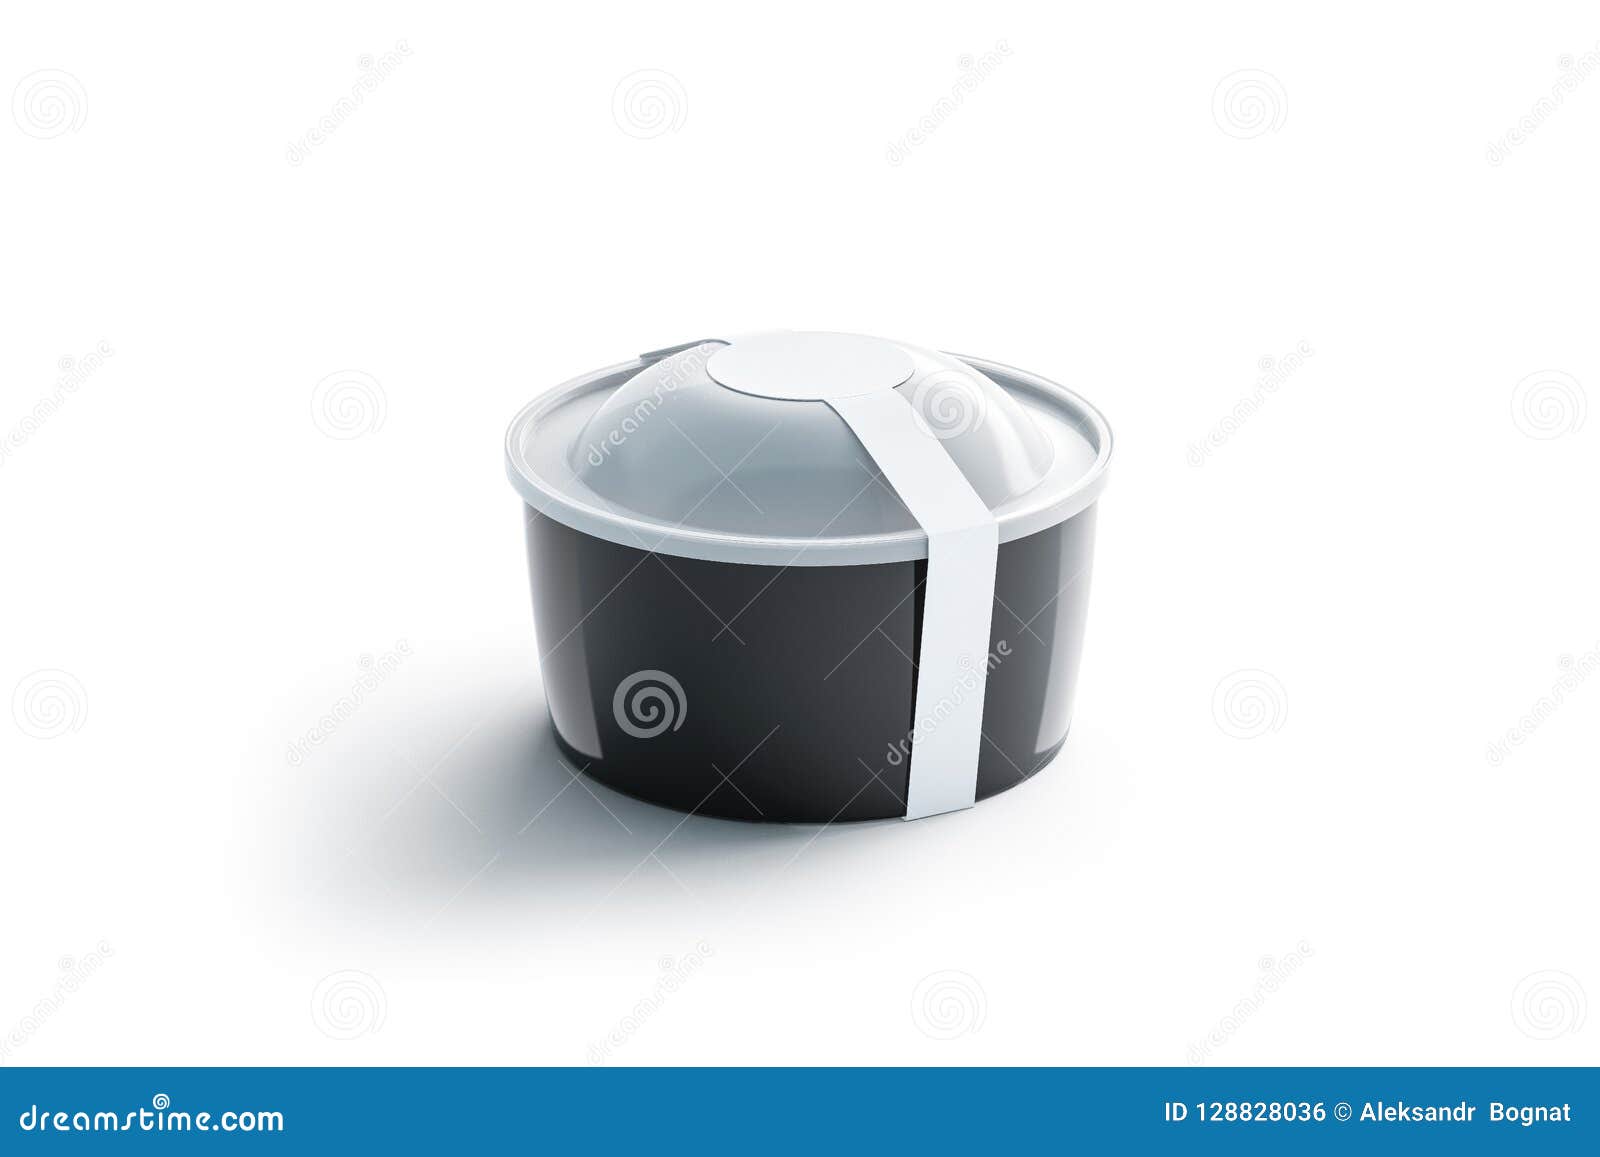 Download Blank Black Round Disposable Container With White Circular ...